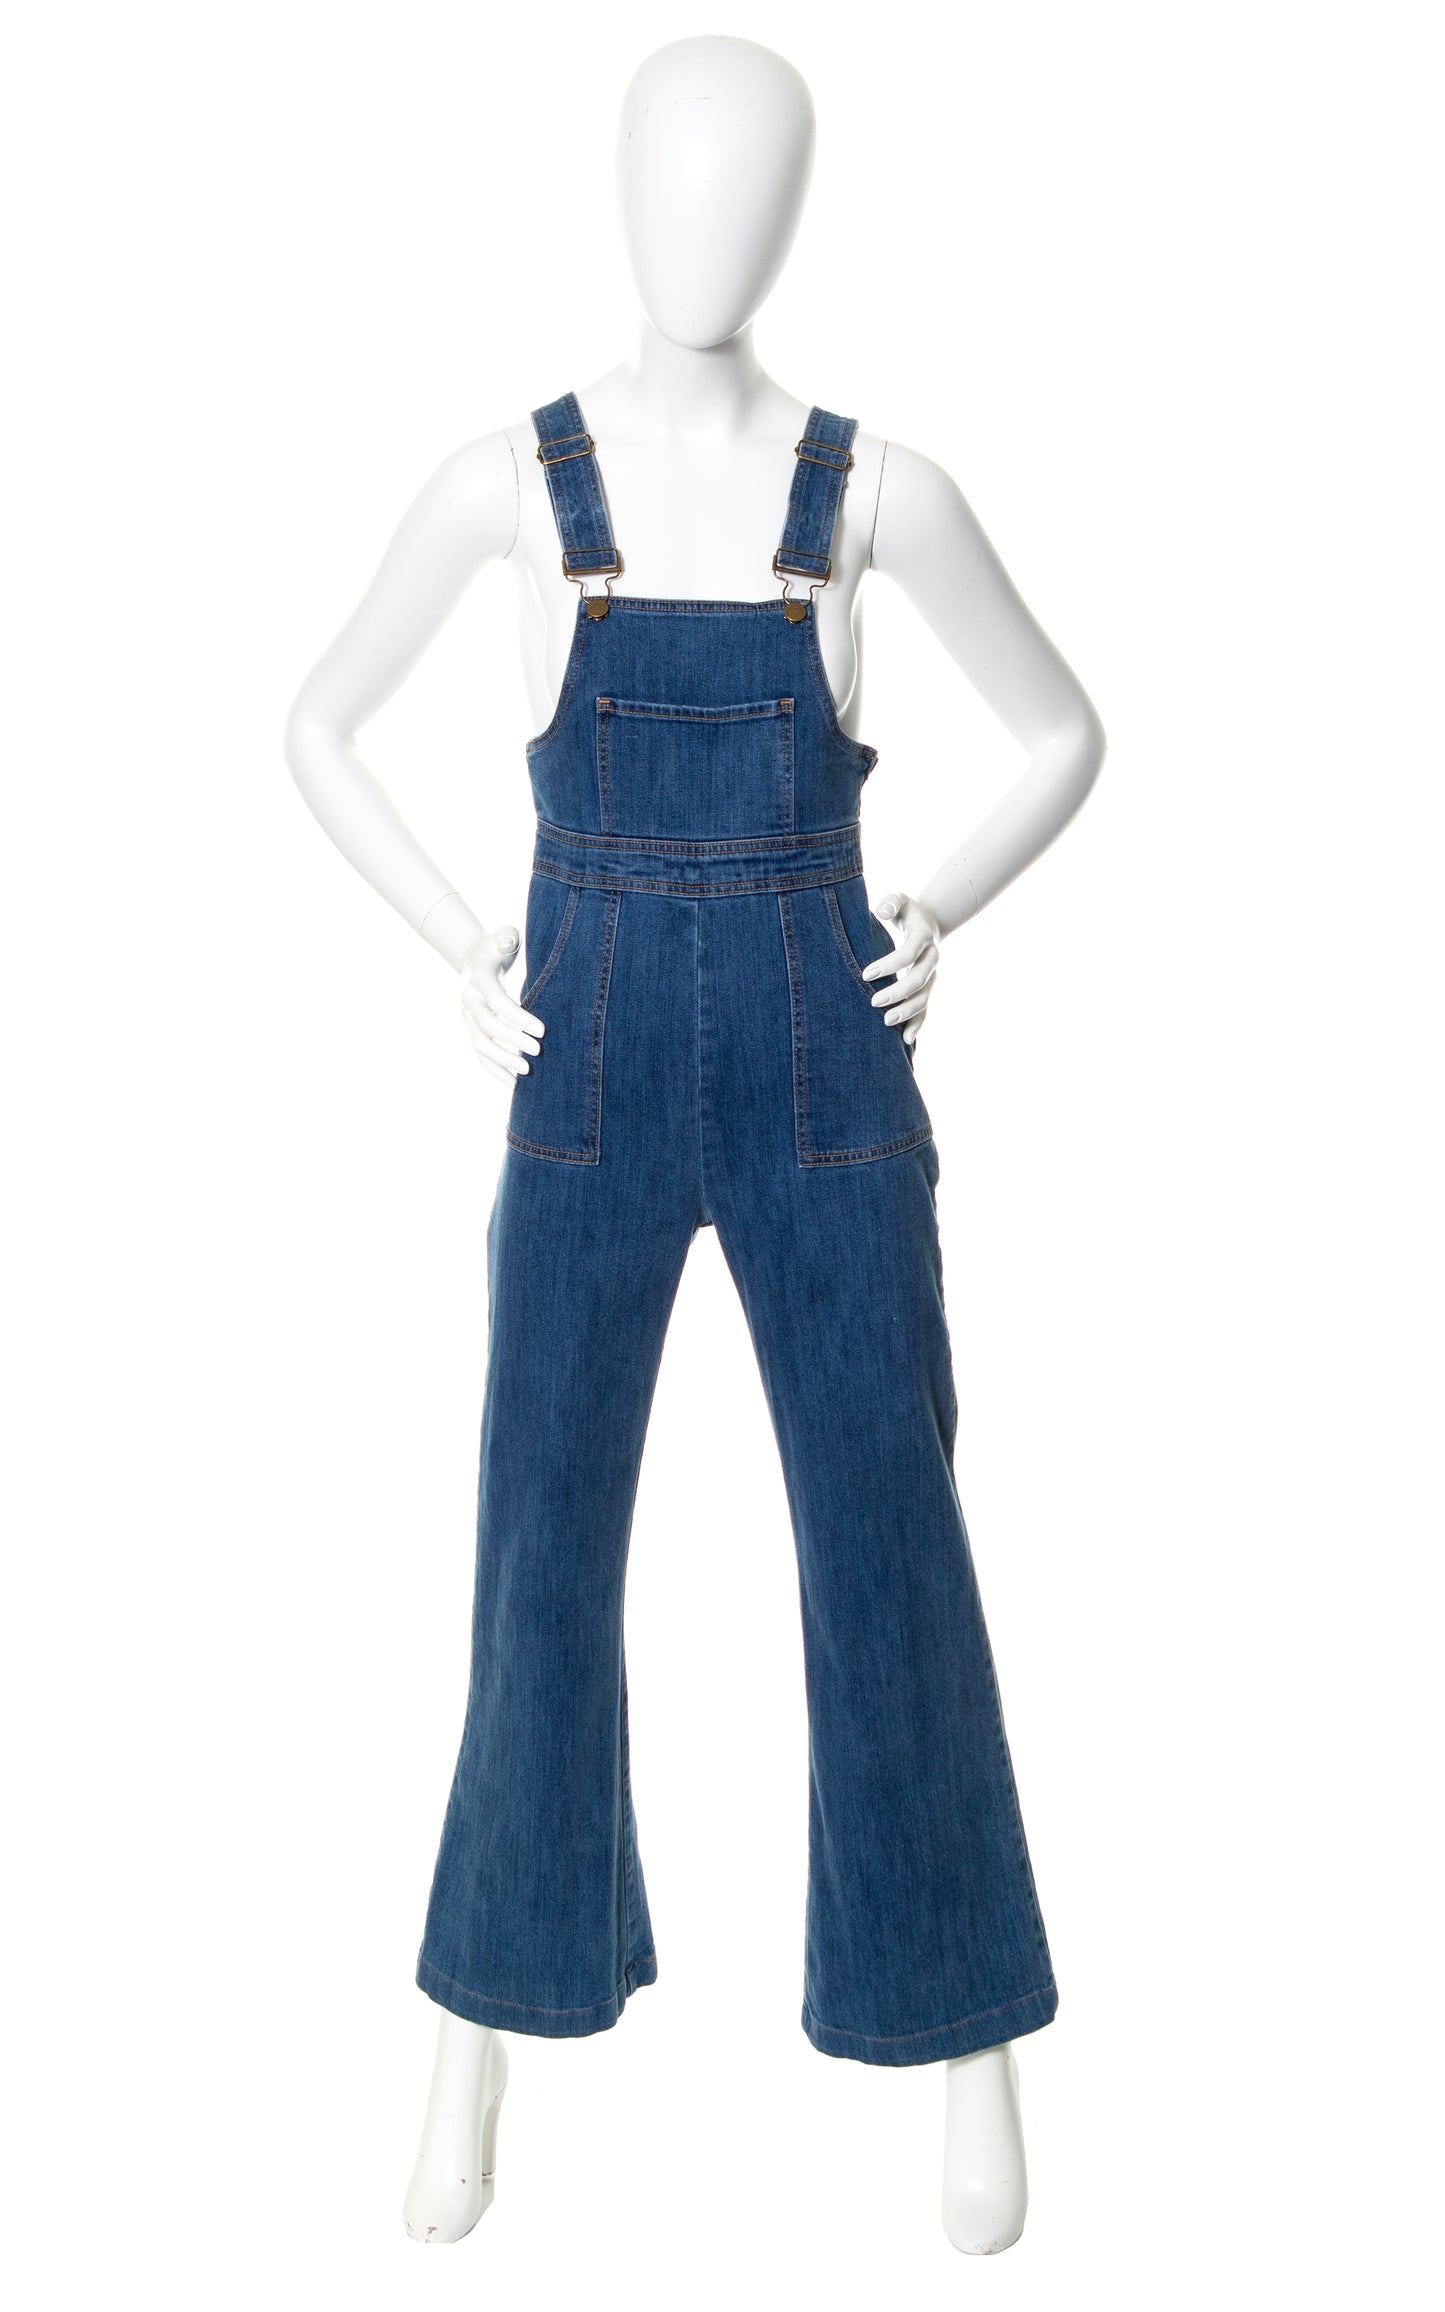 NEW ARRIVAL || Modern STONED IMMACULATE Denim Overalls | small/medium